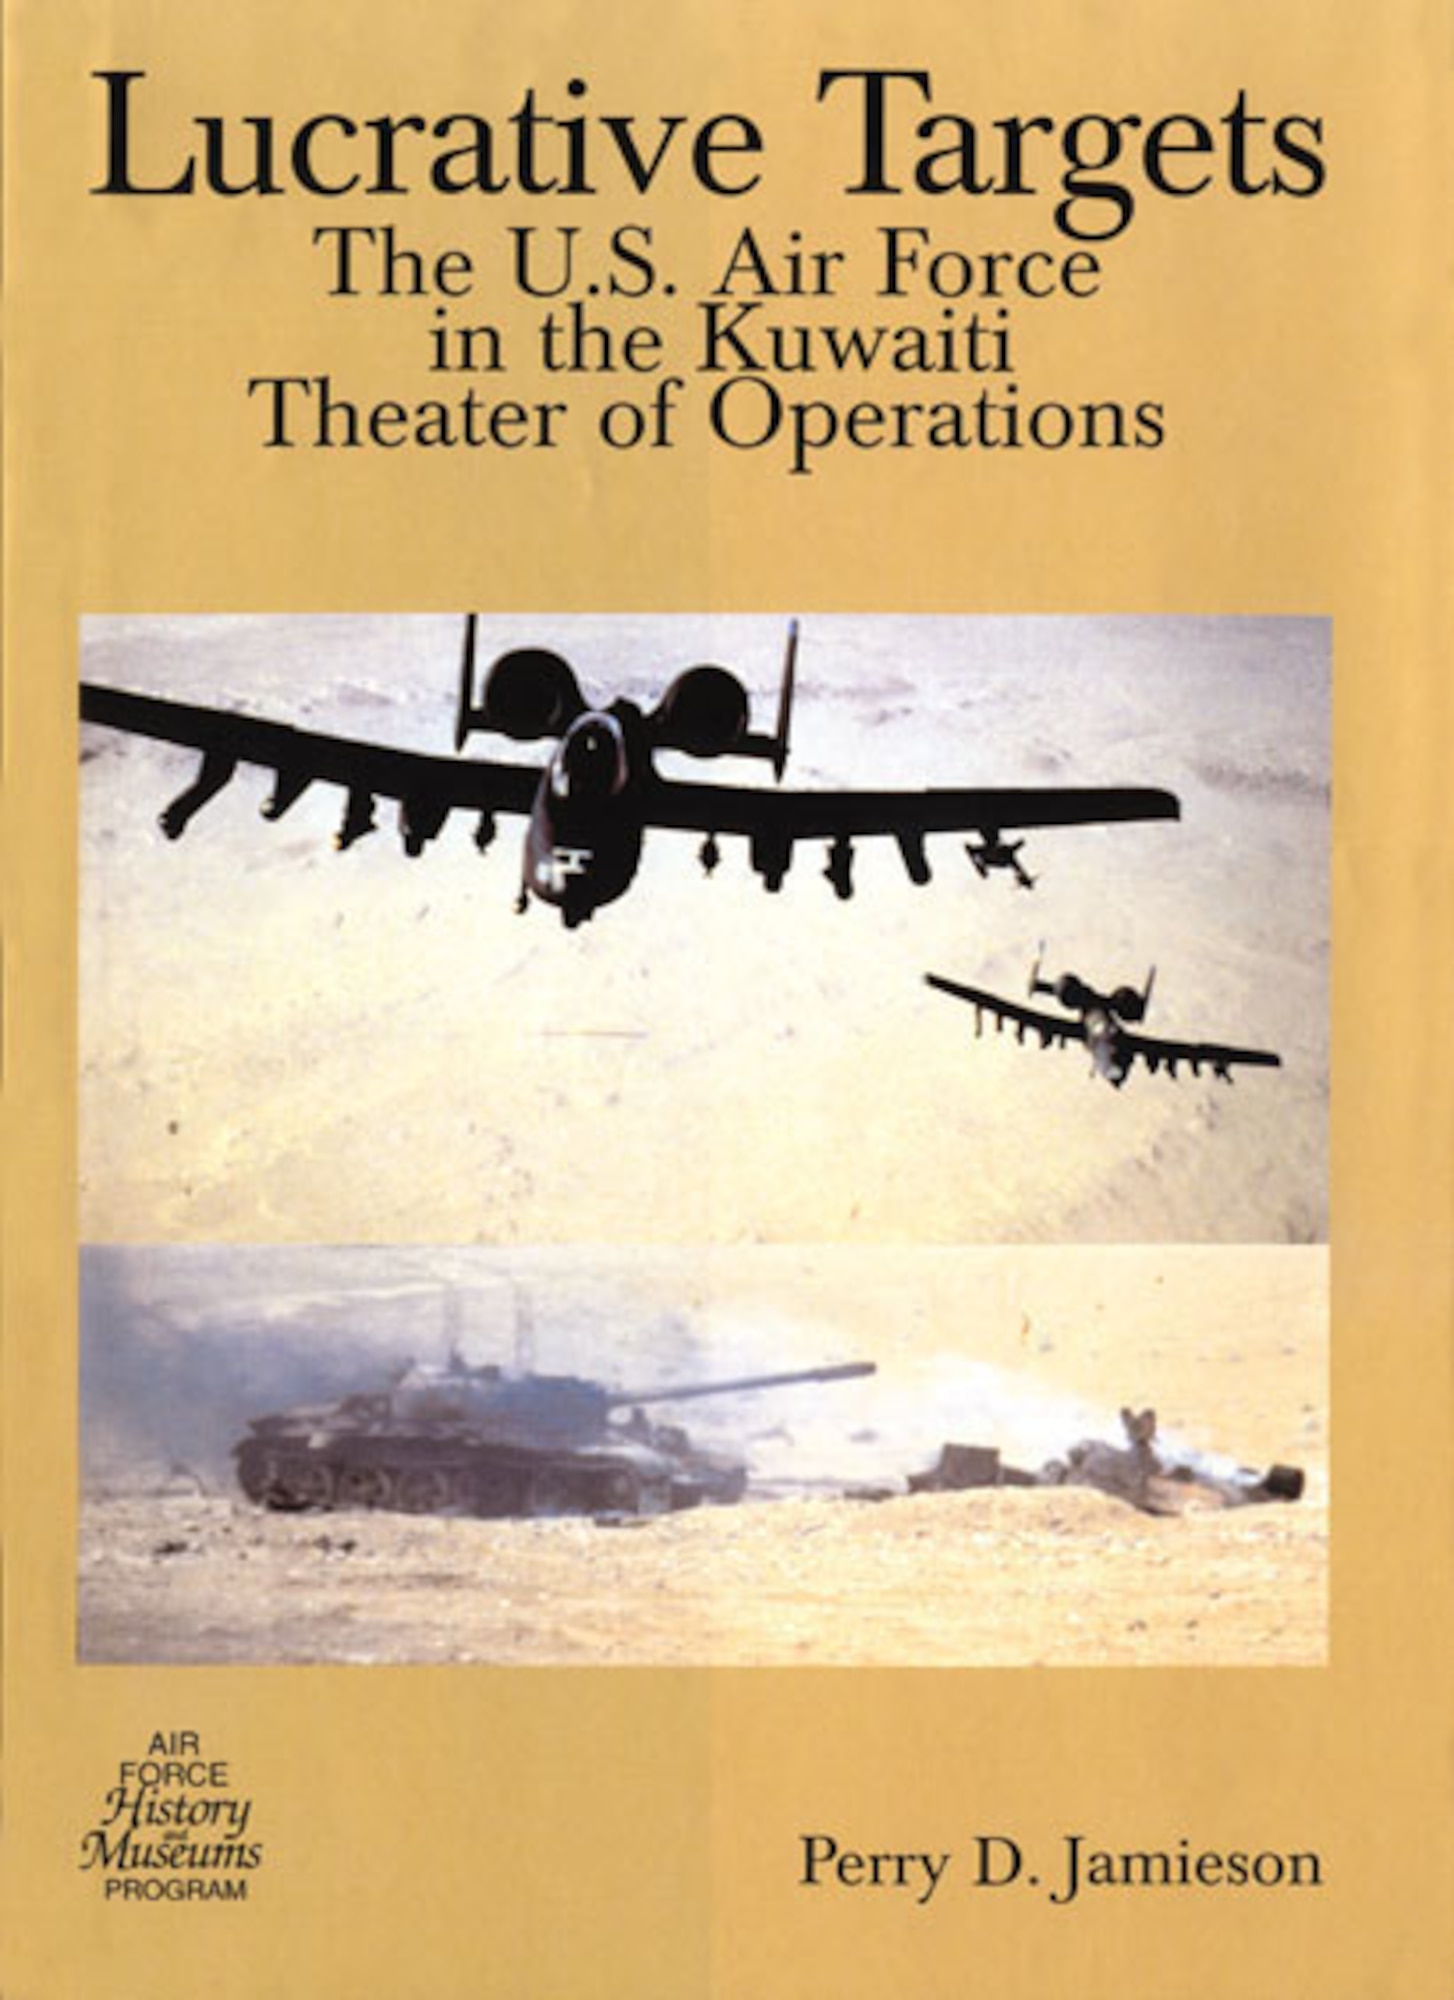 In Jan. and Feb. 1991 millions of Americans watched in fascination as the Gulf War air campaign appeared on their television sets. Most of the coverage then focused on the operations over Iraq. The dramatic air attacks on downtown Baghdad but contrary to what television viewers in 1991 might think, the U.S. Air Force and other Coalition airmen did not direct most of their effort against Baghdad.